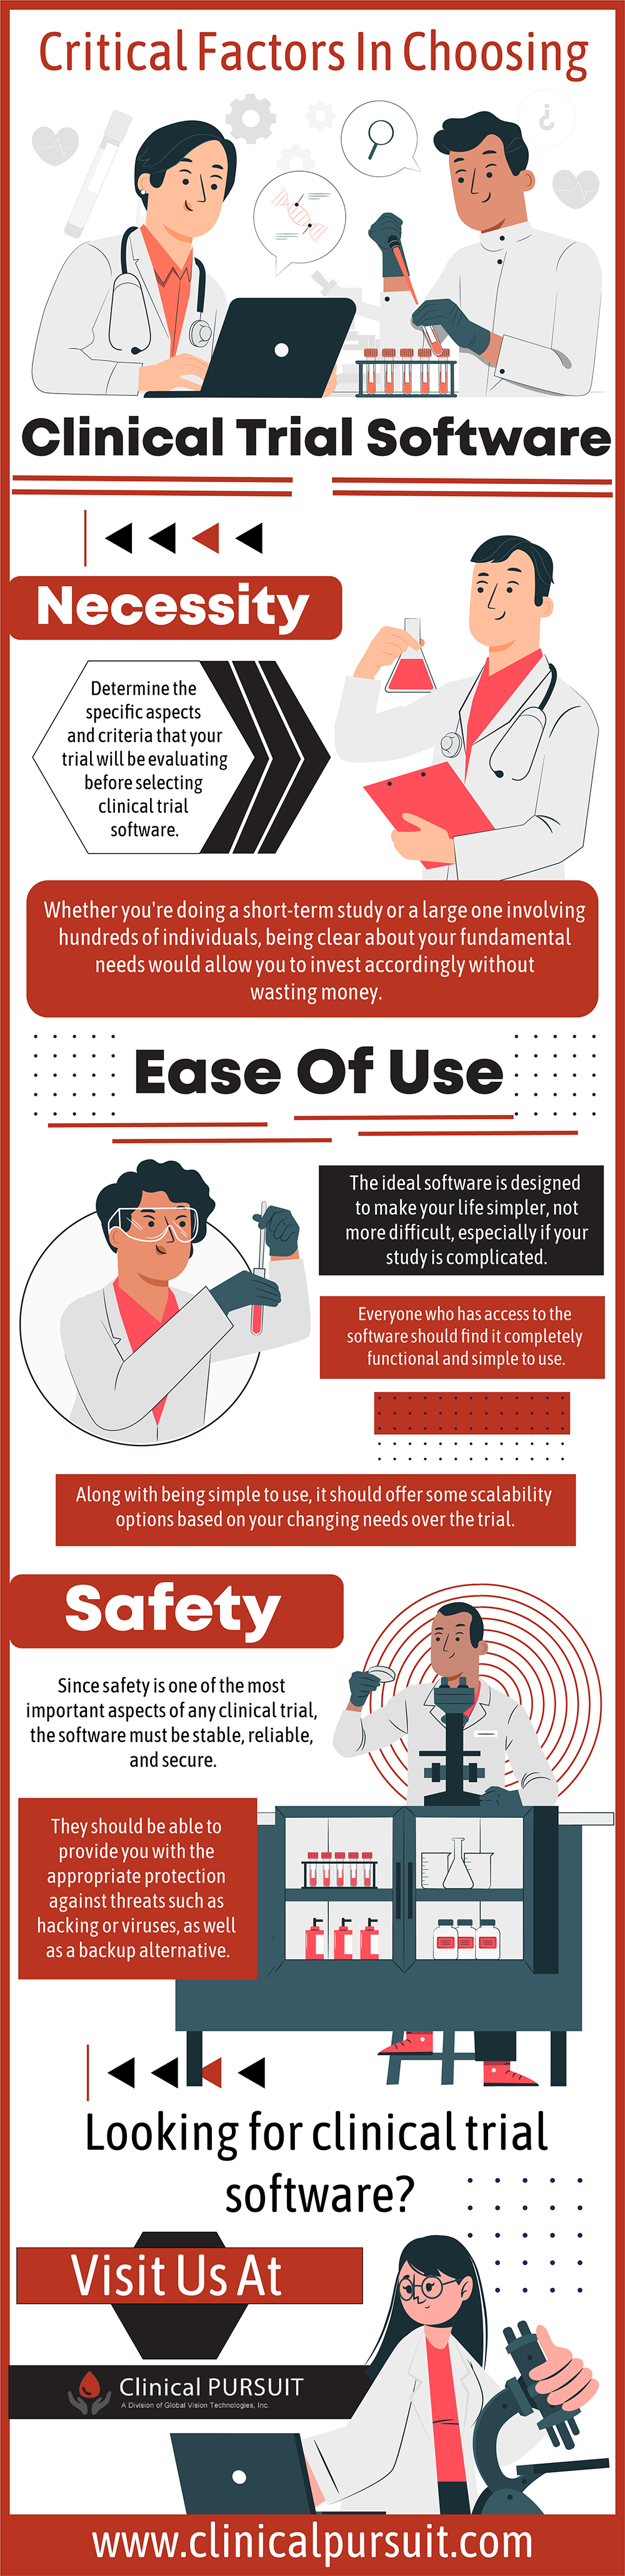 Infographic Explaining - Critical Factors in Choosing Clinical Trial Software